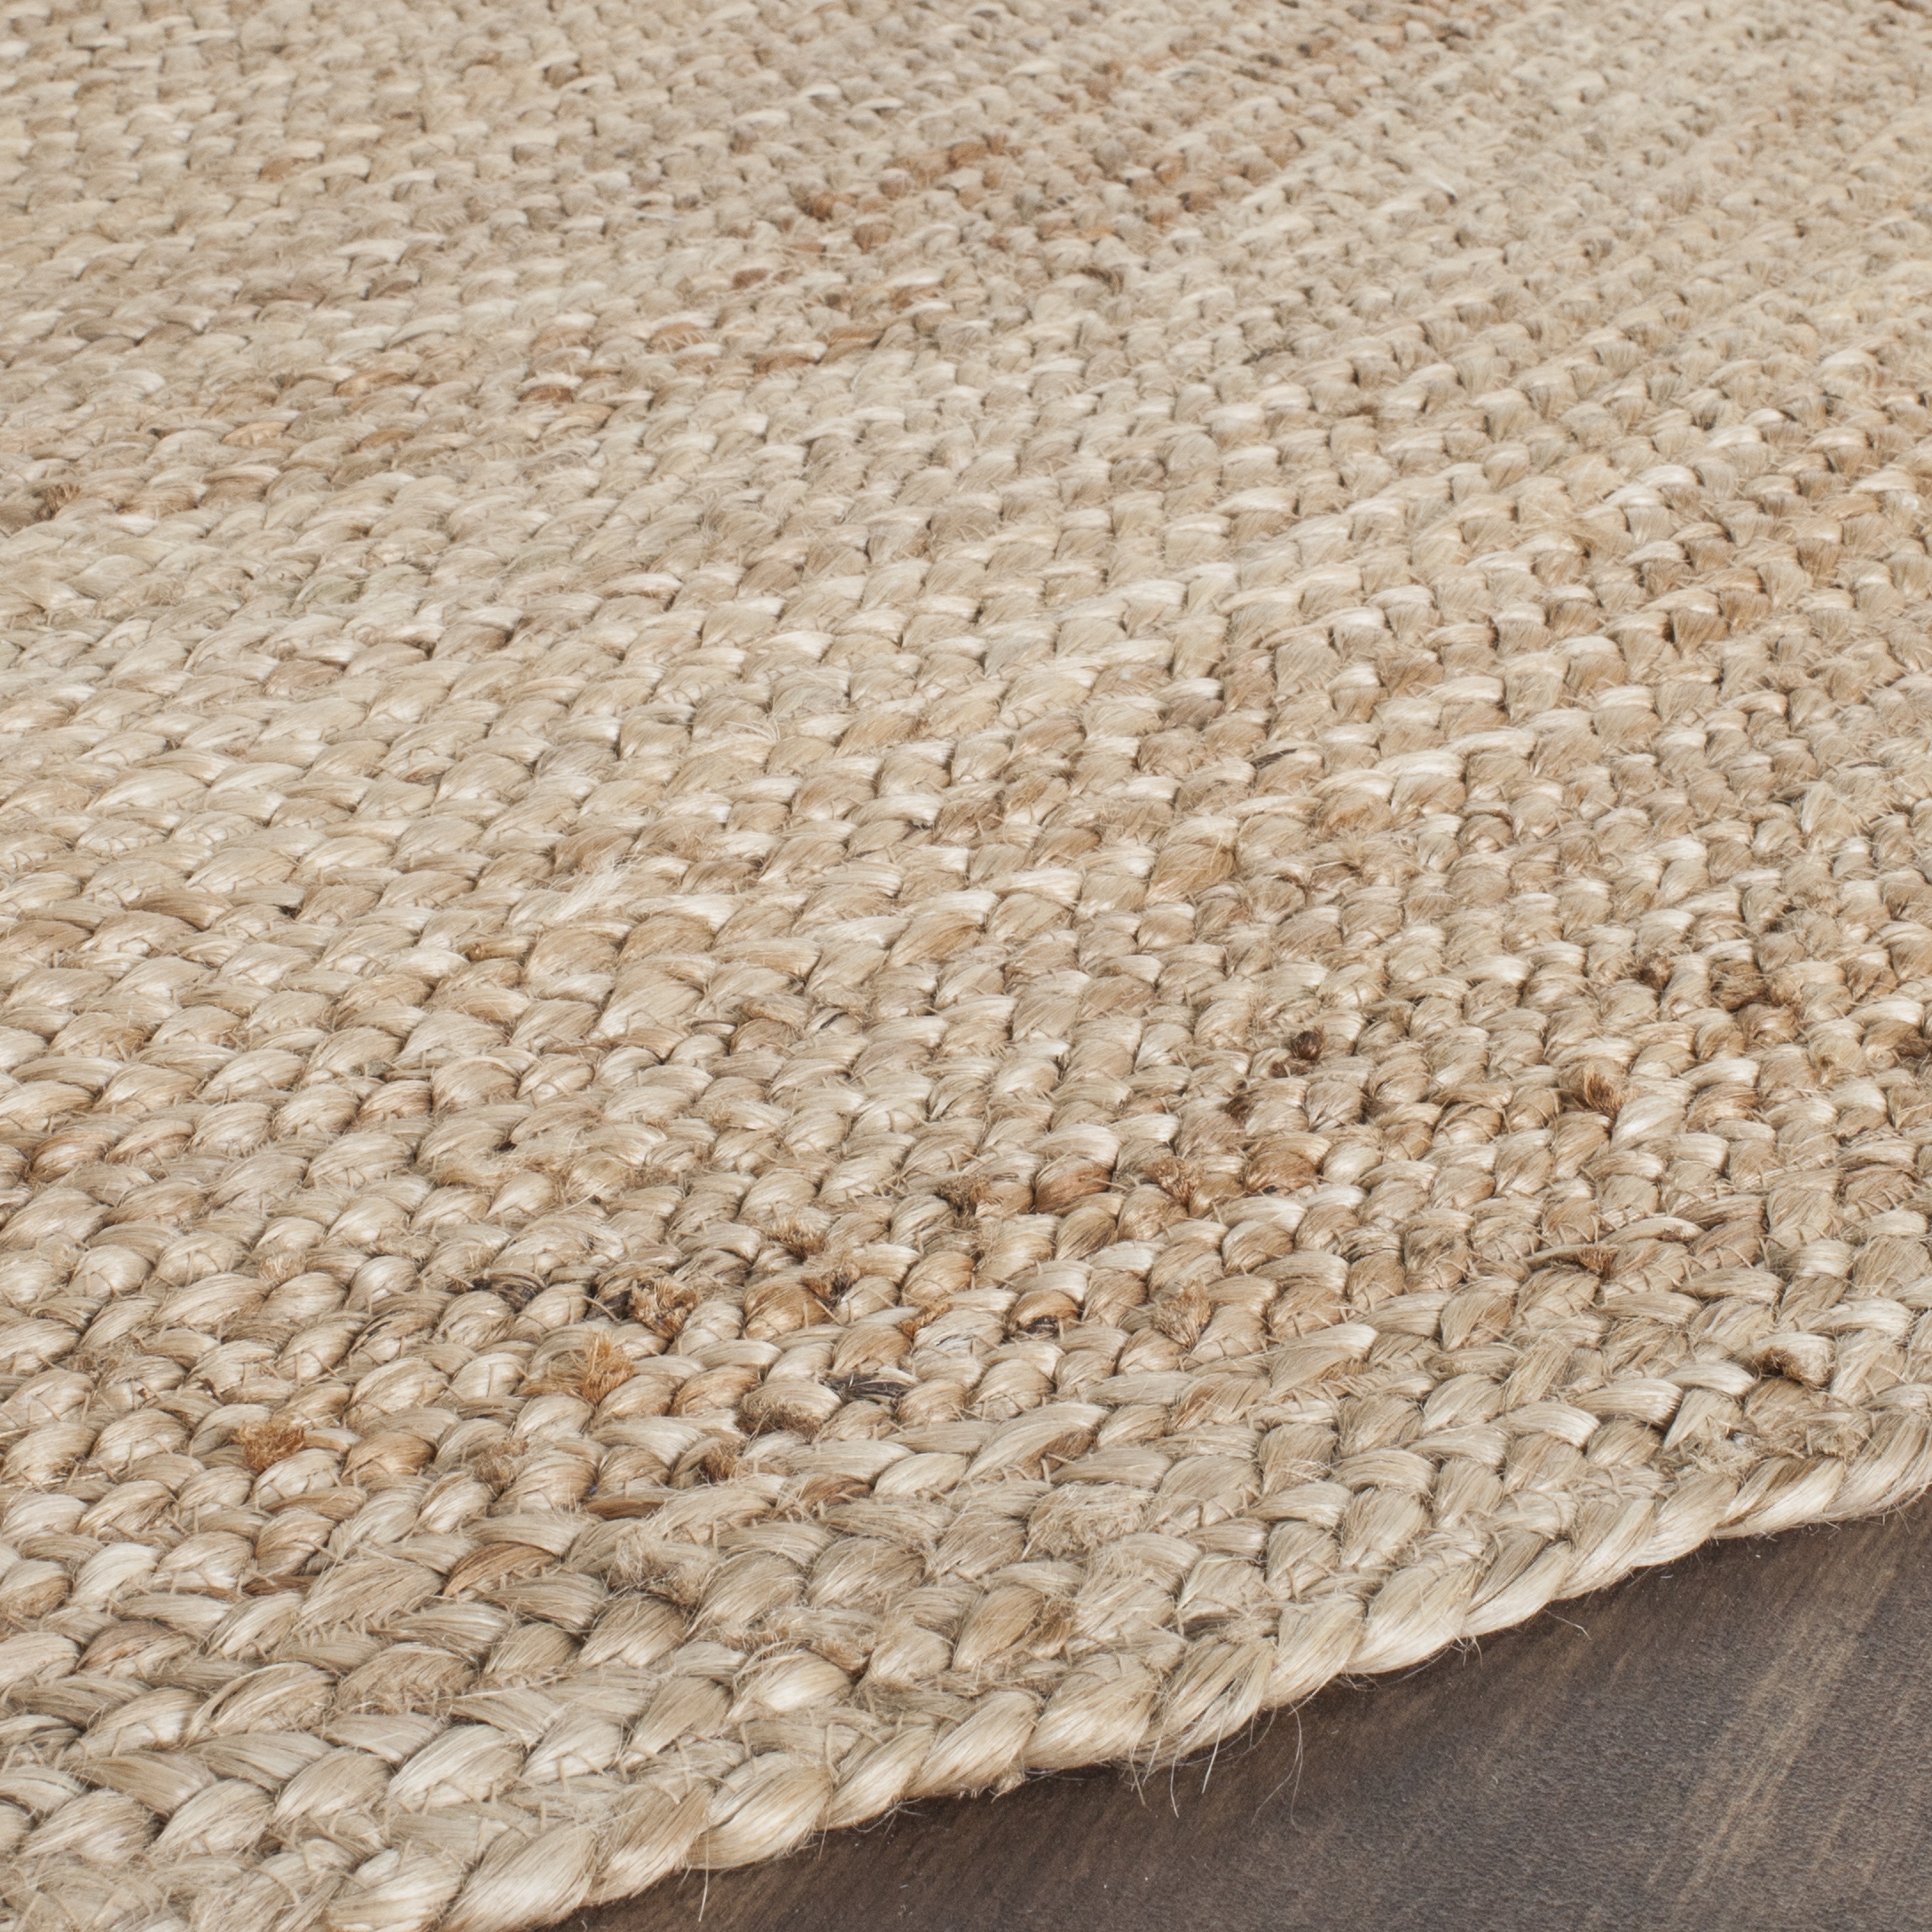 Arlo Home Hand Woven Area Rug, CAP252A, Natural,  6' X 9' Oval - Image 2